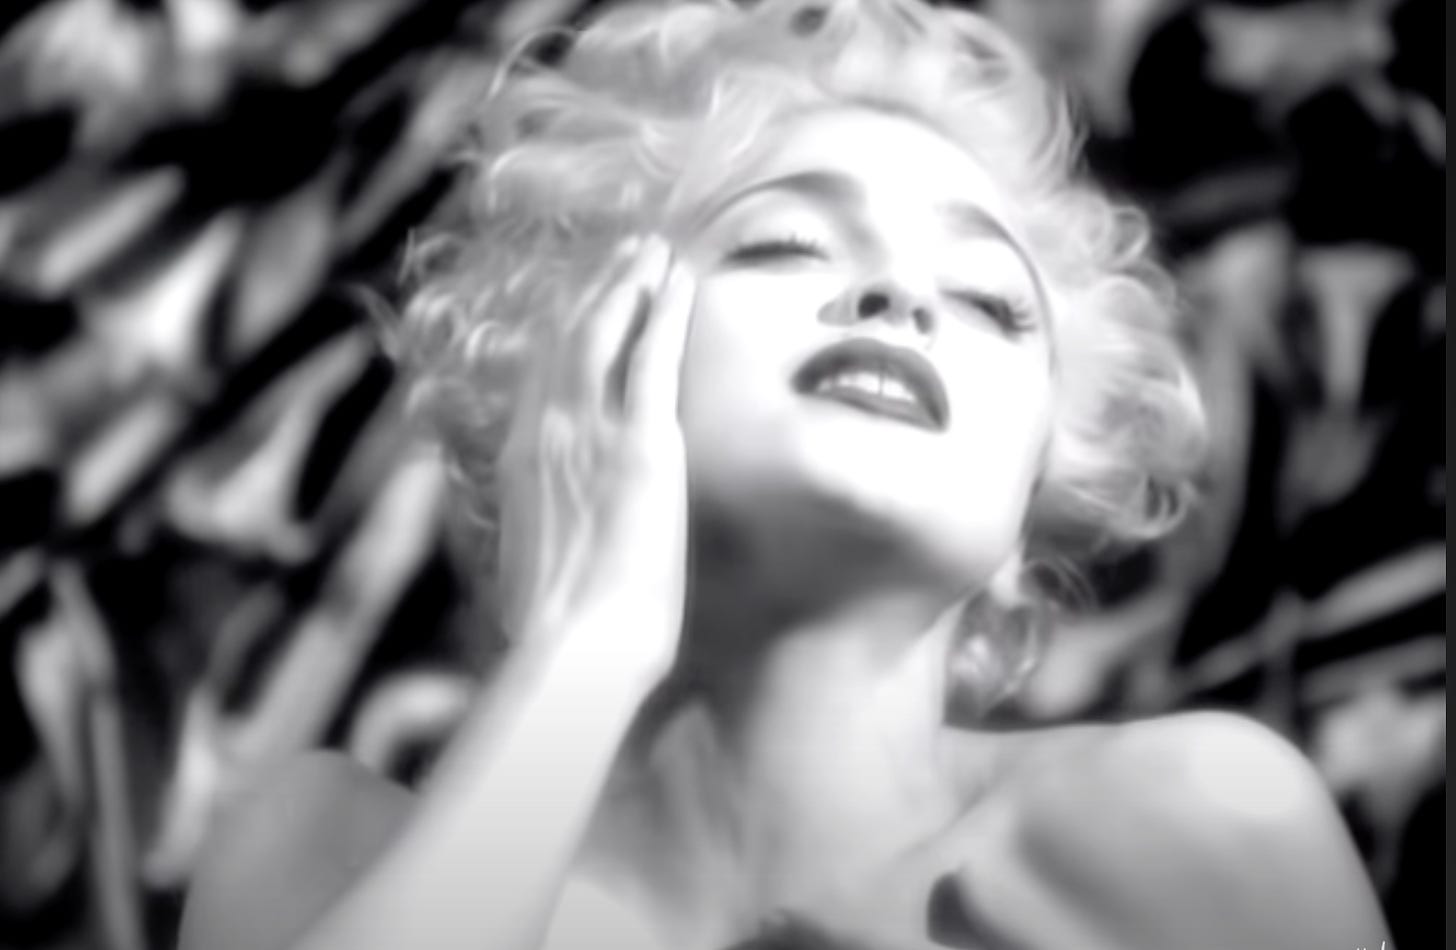 madonna in the vogue video, with bare shoulders and touching her face